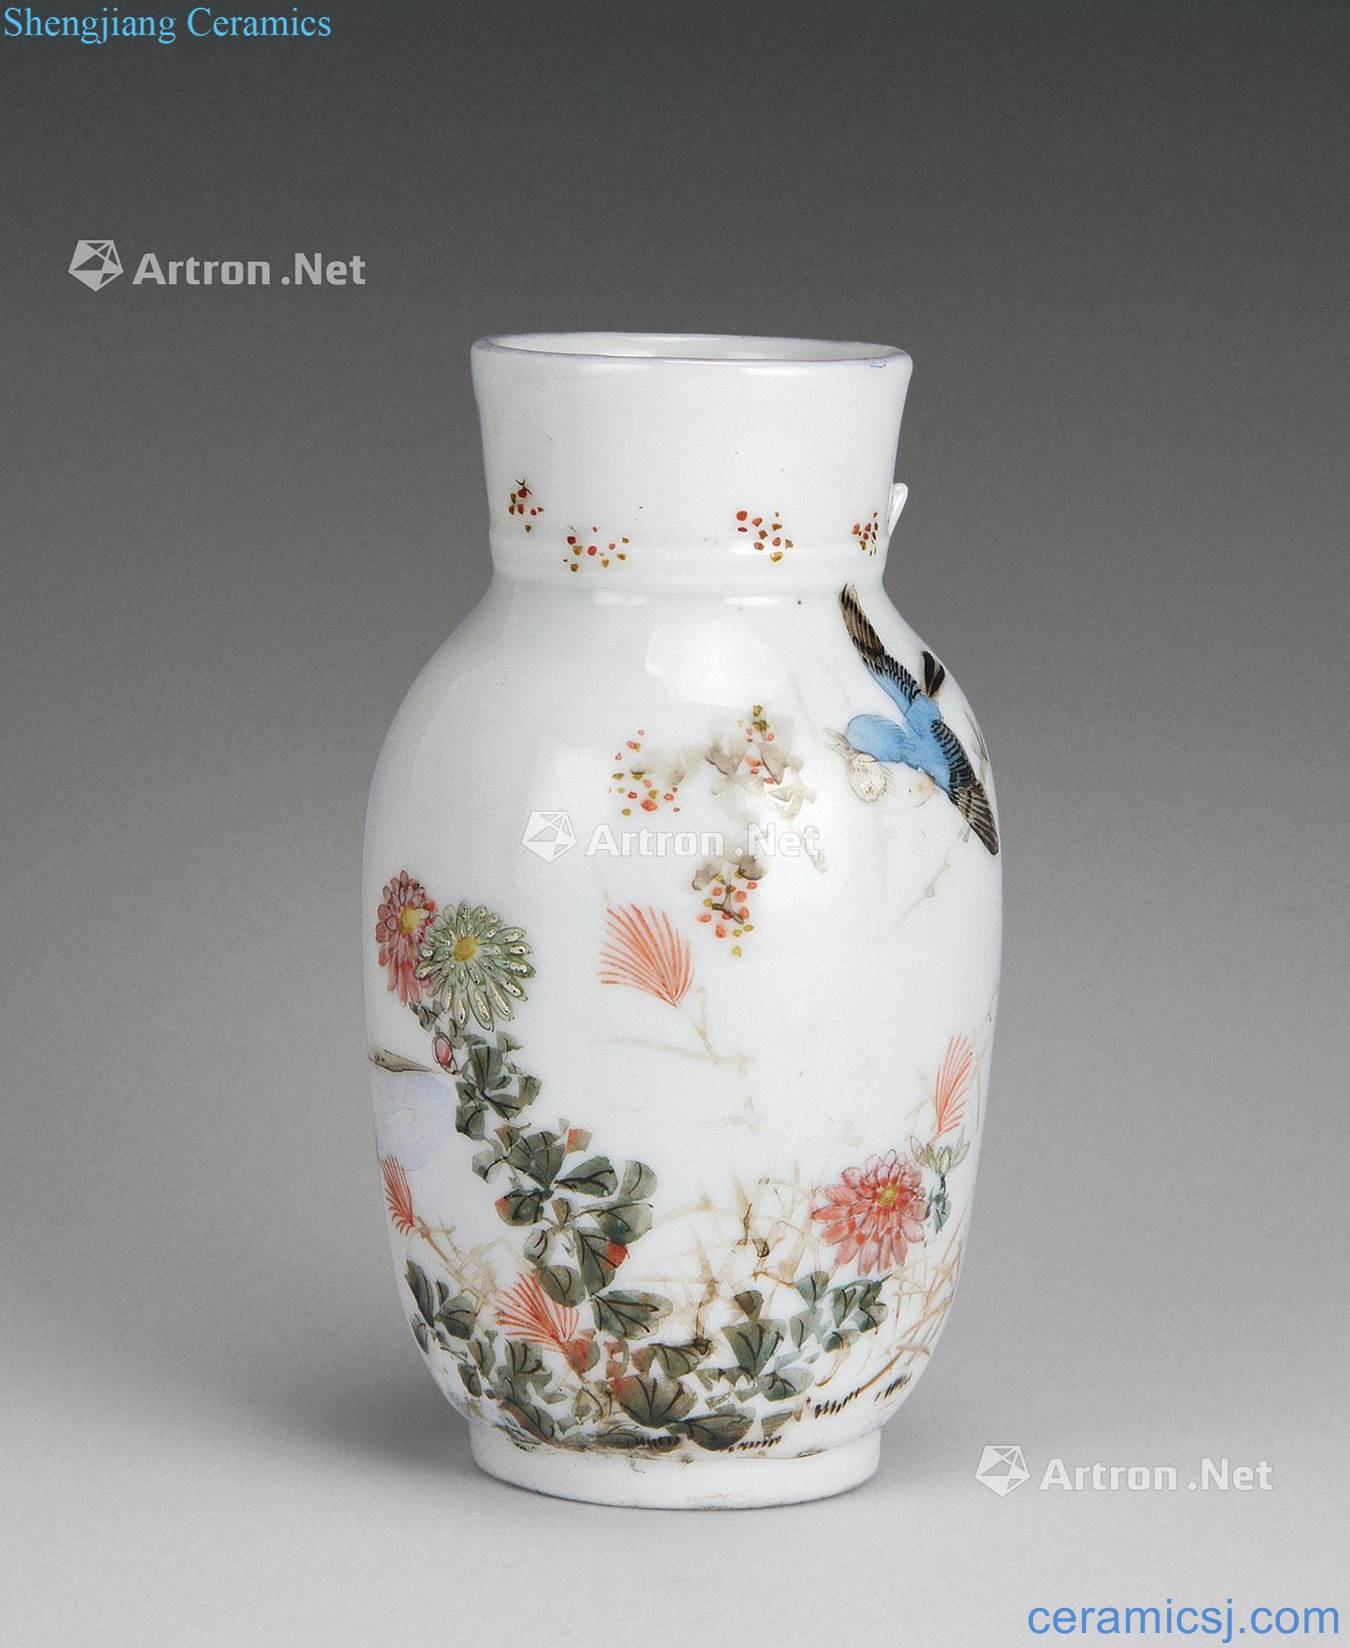 In the qing dynasty (1644-1911), glaze color of flowers and birds on the bottle